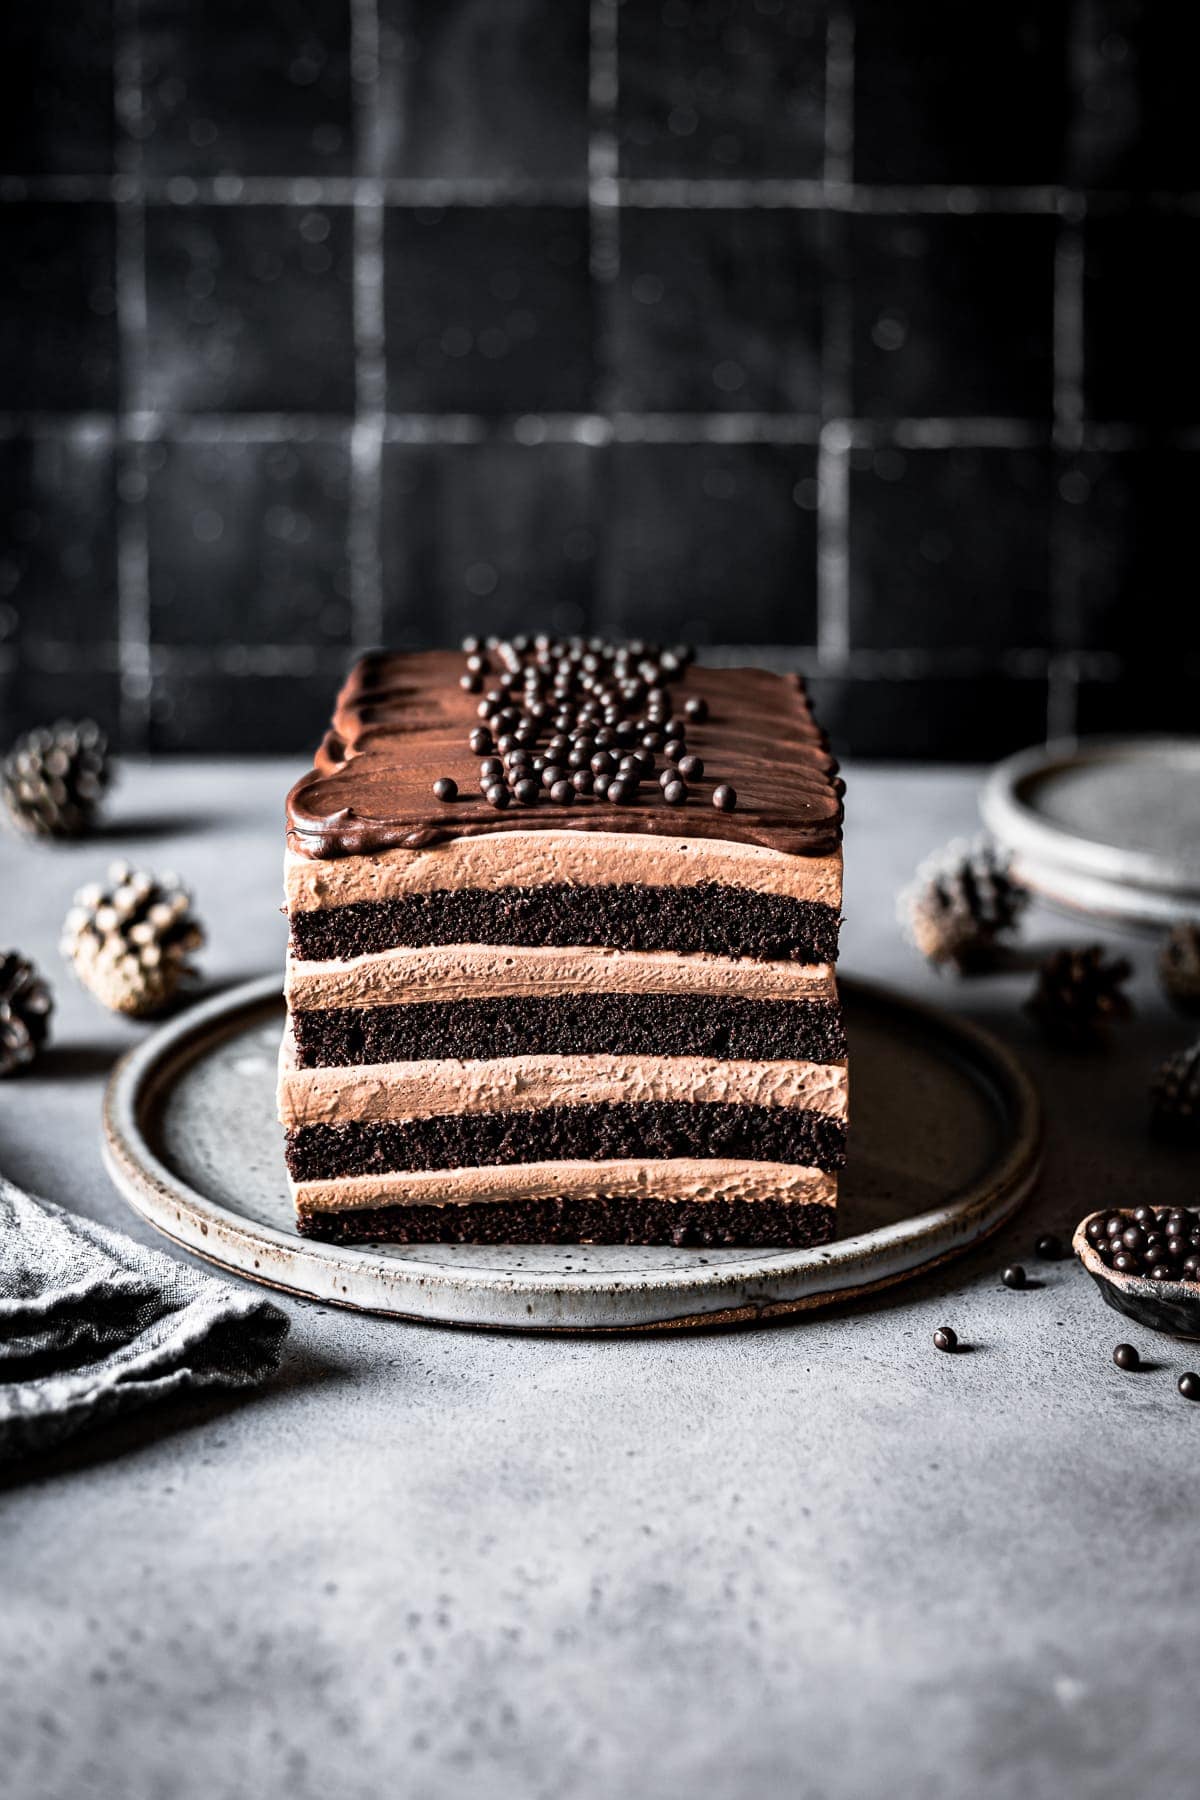 A layered rectangular chocolate cake with mousse filling on a grey plate and grey stone surface with a black tile background. Edible chocolate pearls in a small bowl and two ceramic plates peek out from the right hand of the scene. There are pine cones out of focus in the back of the image. 